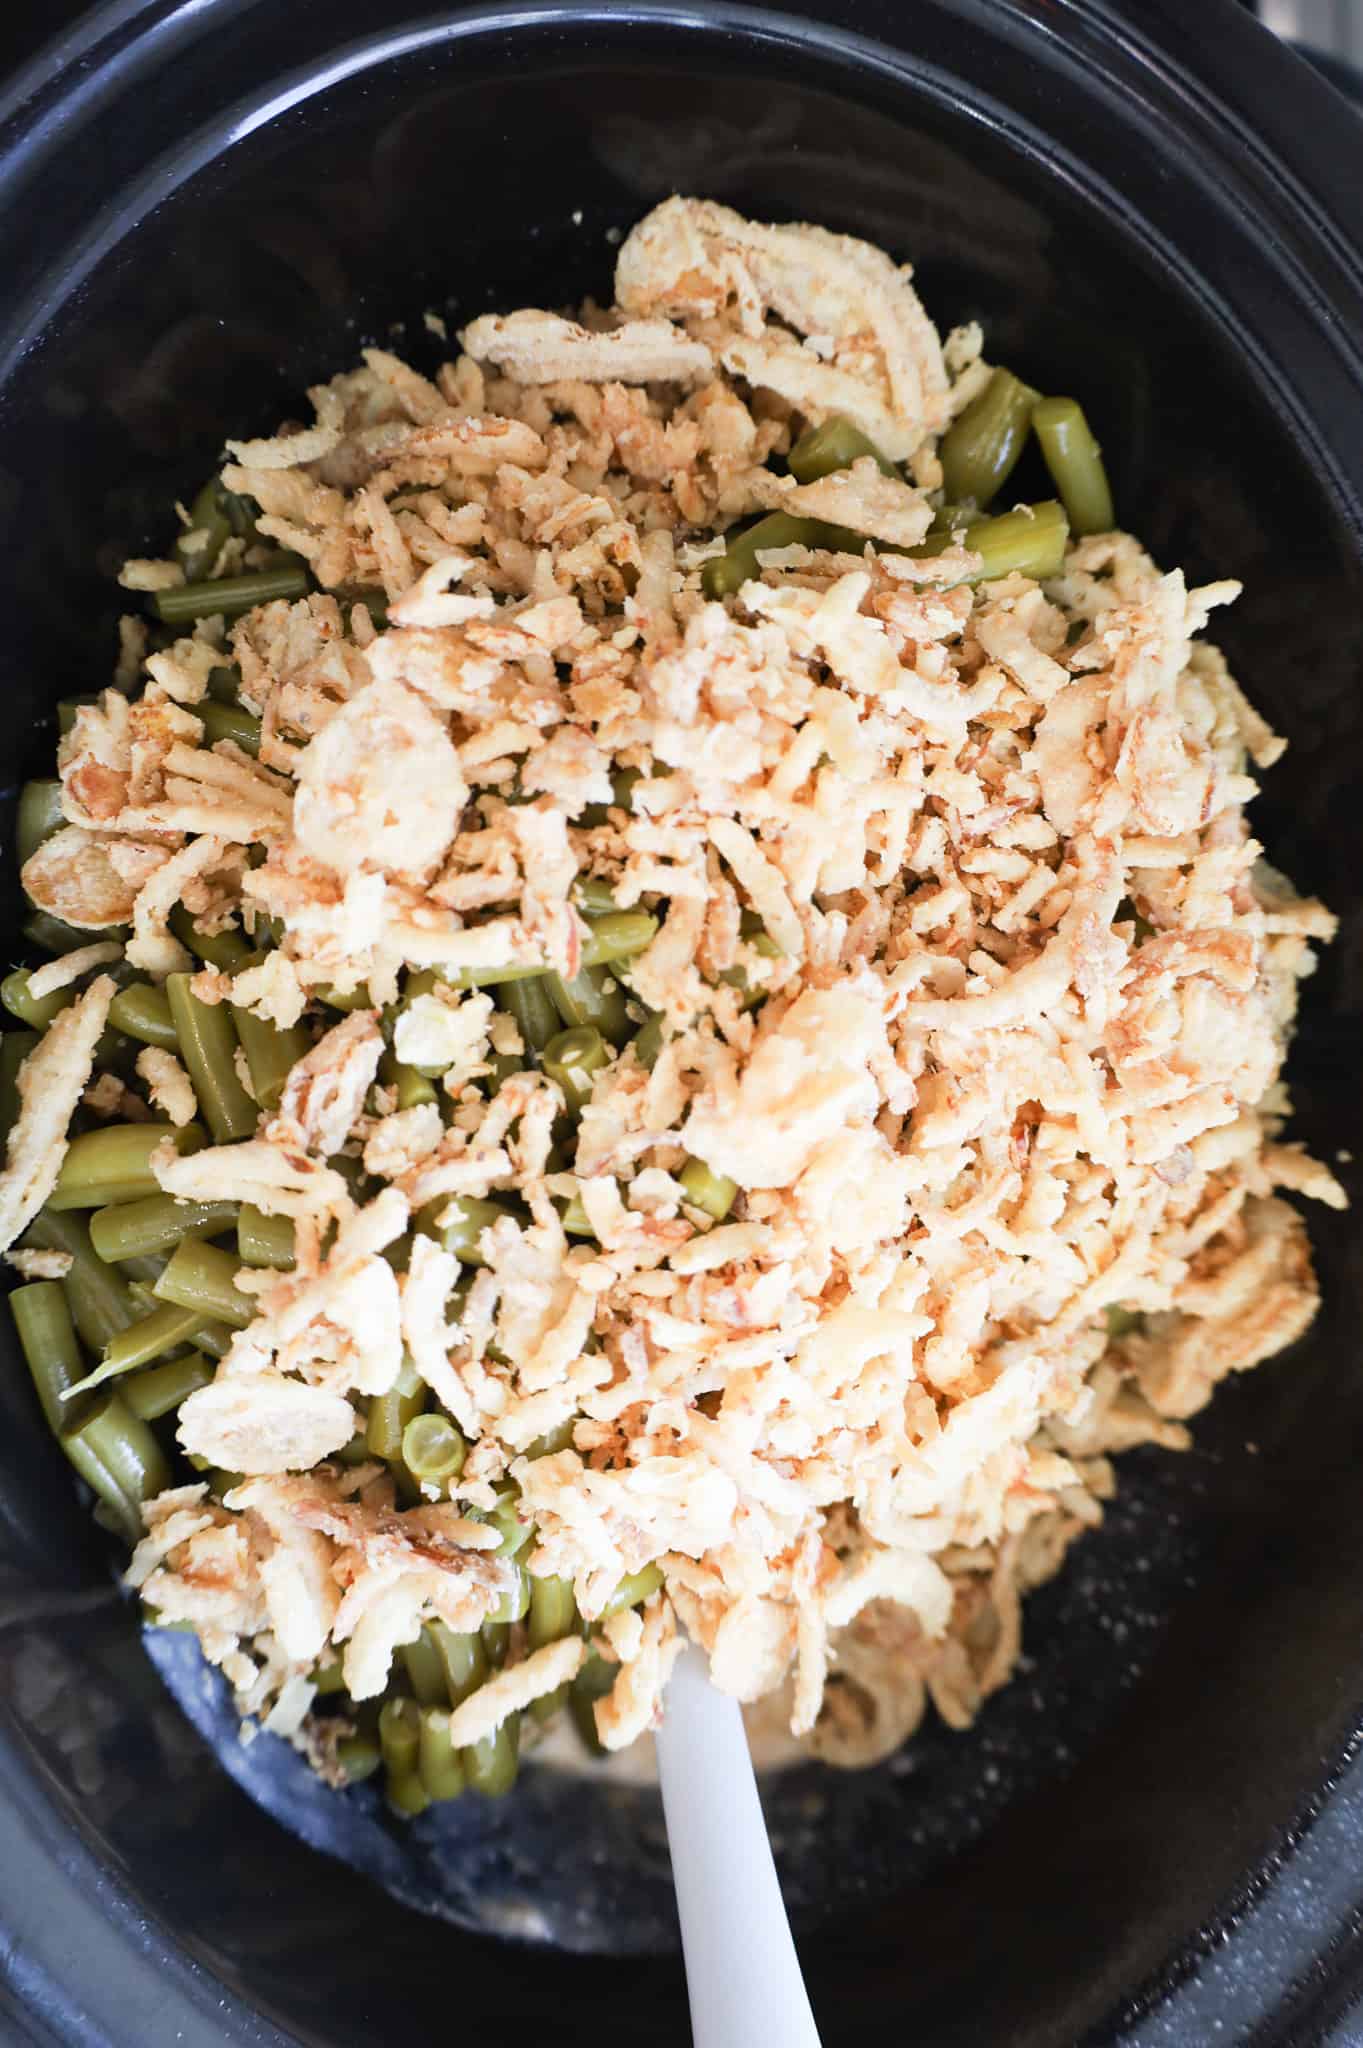 French's crispy fried onions on top of green beans in a slow cooker